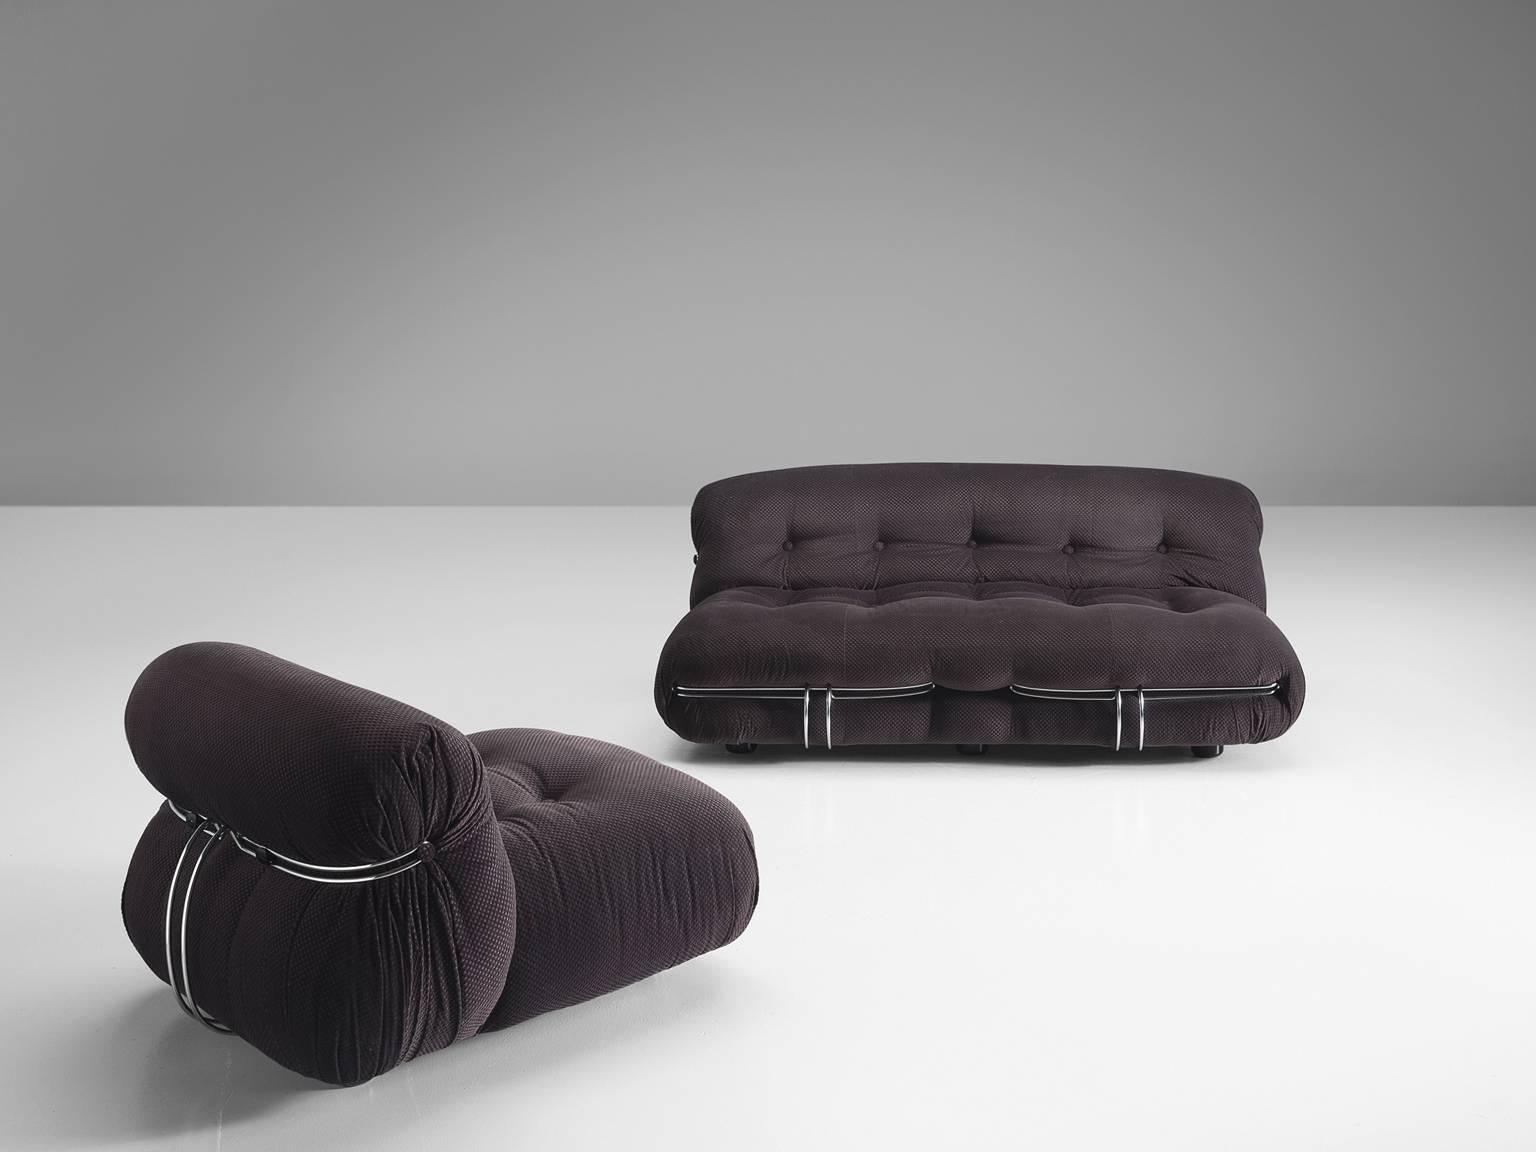 Afra & Tobia Scarpa for Cassina, 'Soriana' sofa and lounge chair, grey fabric and metal, Italy, 1969. 

Iconic sofa and lounge chair by Italian designer couple Afra & Tobia Scarpa, the Soriana proposes a model that institutionalizes the image of